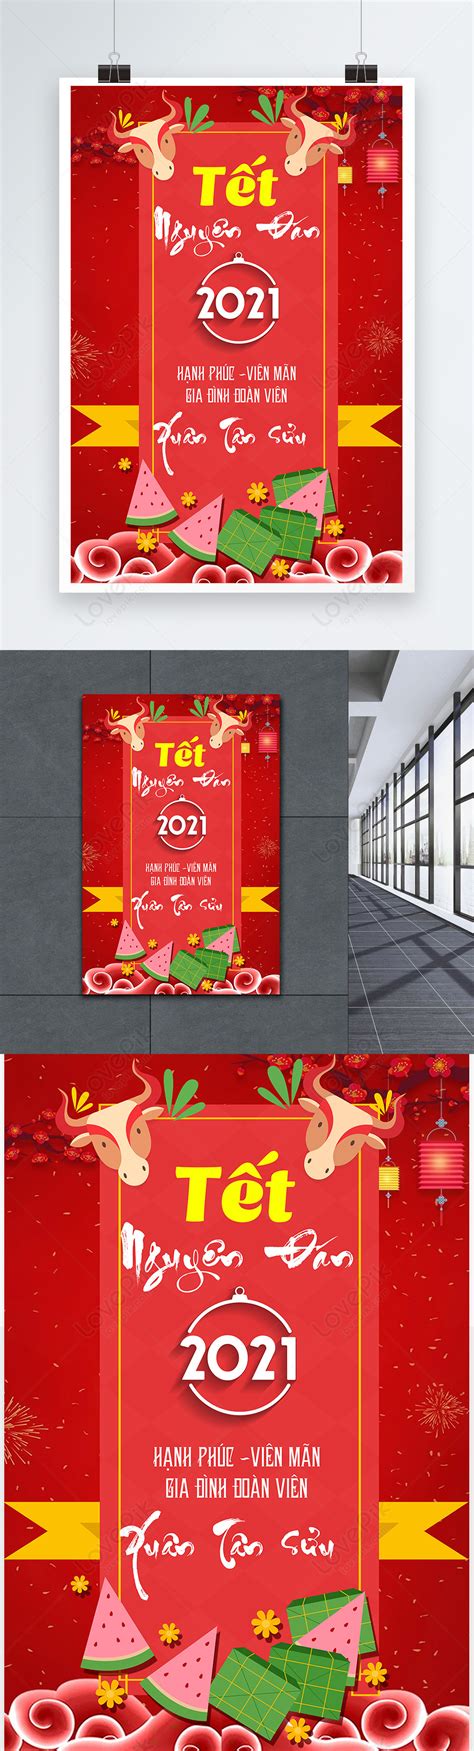 Vietnam Lunar New Year 2021 Greeting Poster Template Imagepicture Free